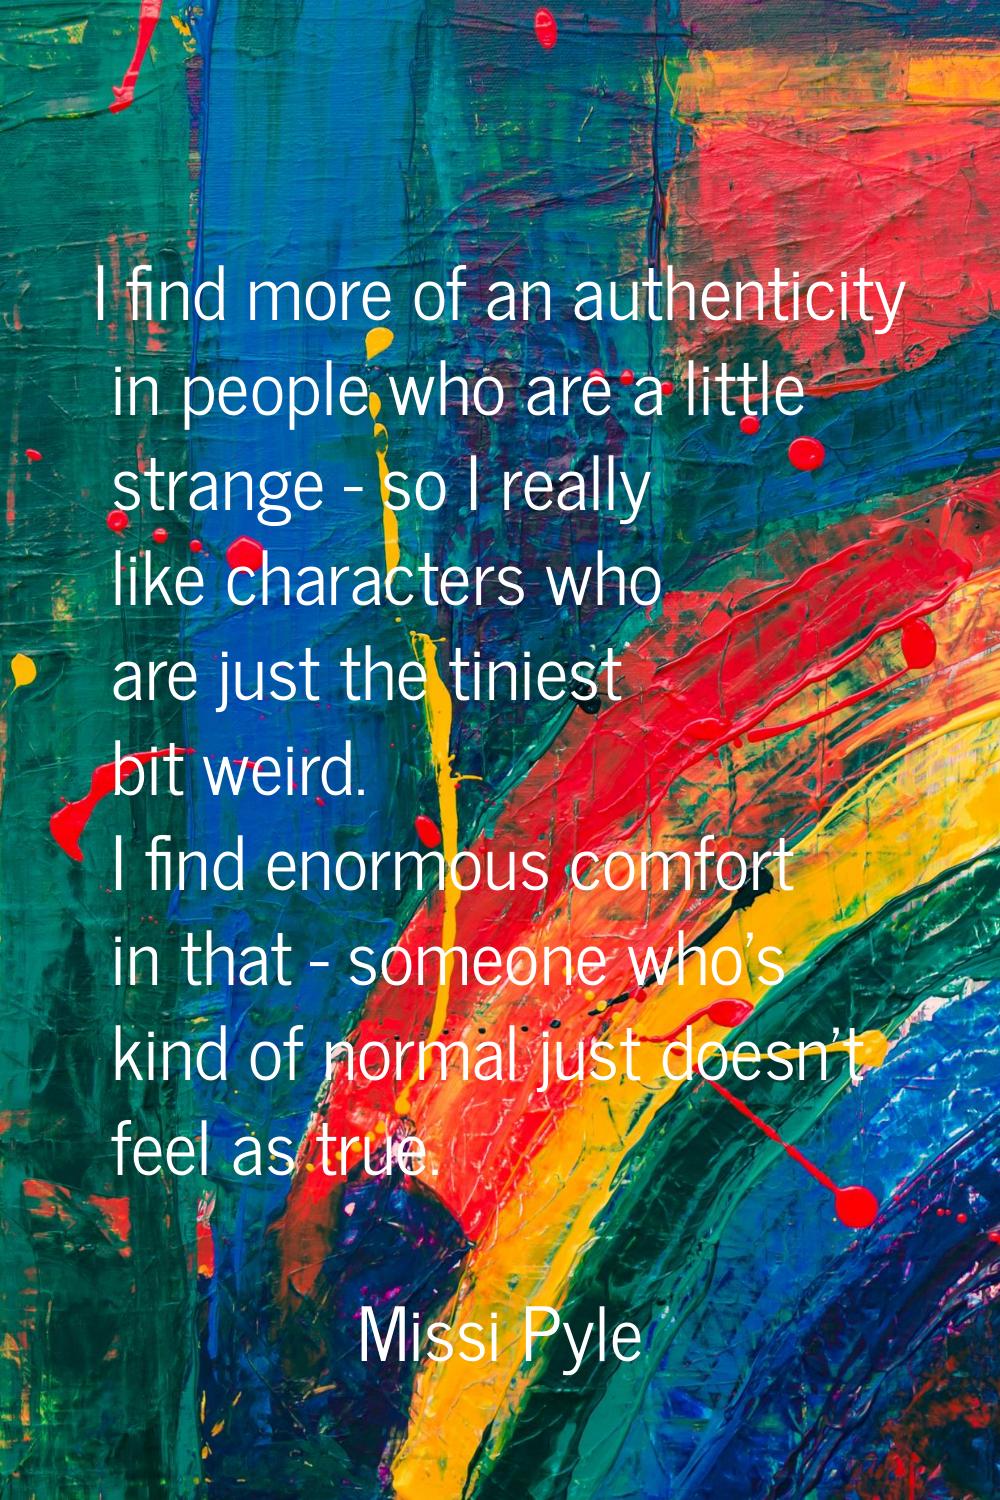 I find more of an authenticity in people who are a little strange - so I really like characters who